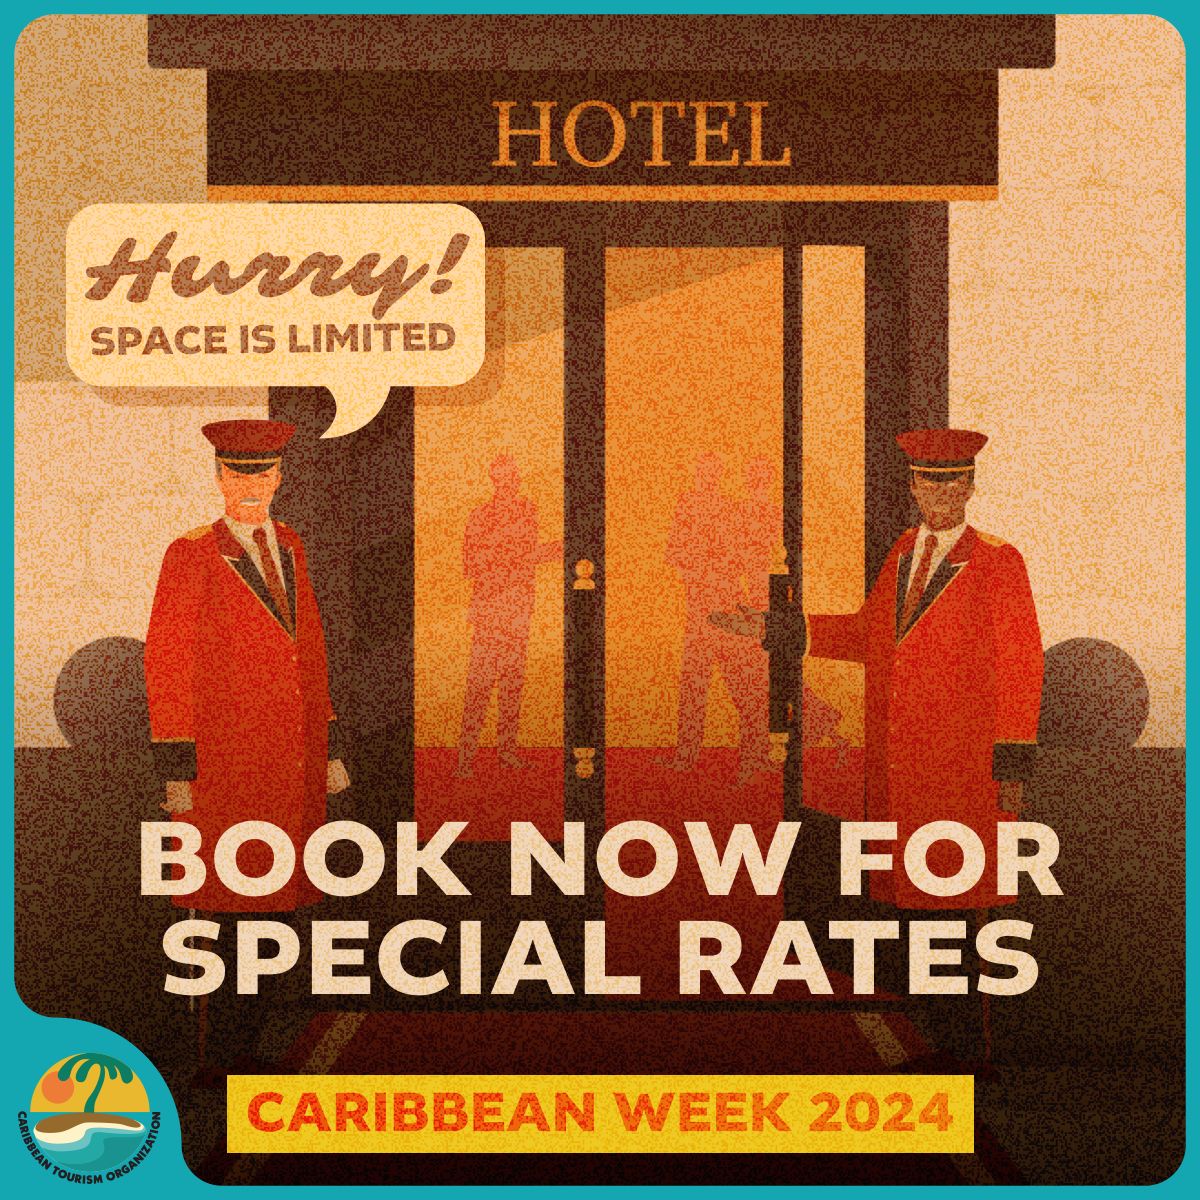 Have you booked your rooms for Caribbean Week in New York yet (June 16-21)? We’ve secured special rates at the Intercontinental Times Square in Manhattan, our host hotel, but rooms are selling out fast! 🏨 Secure your spot here: book.passkey.com/e/50827200. #CWNYC24 #CTO24